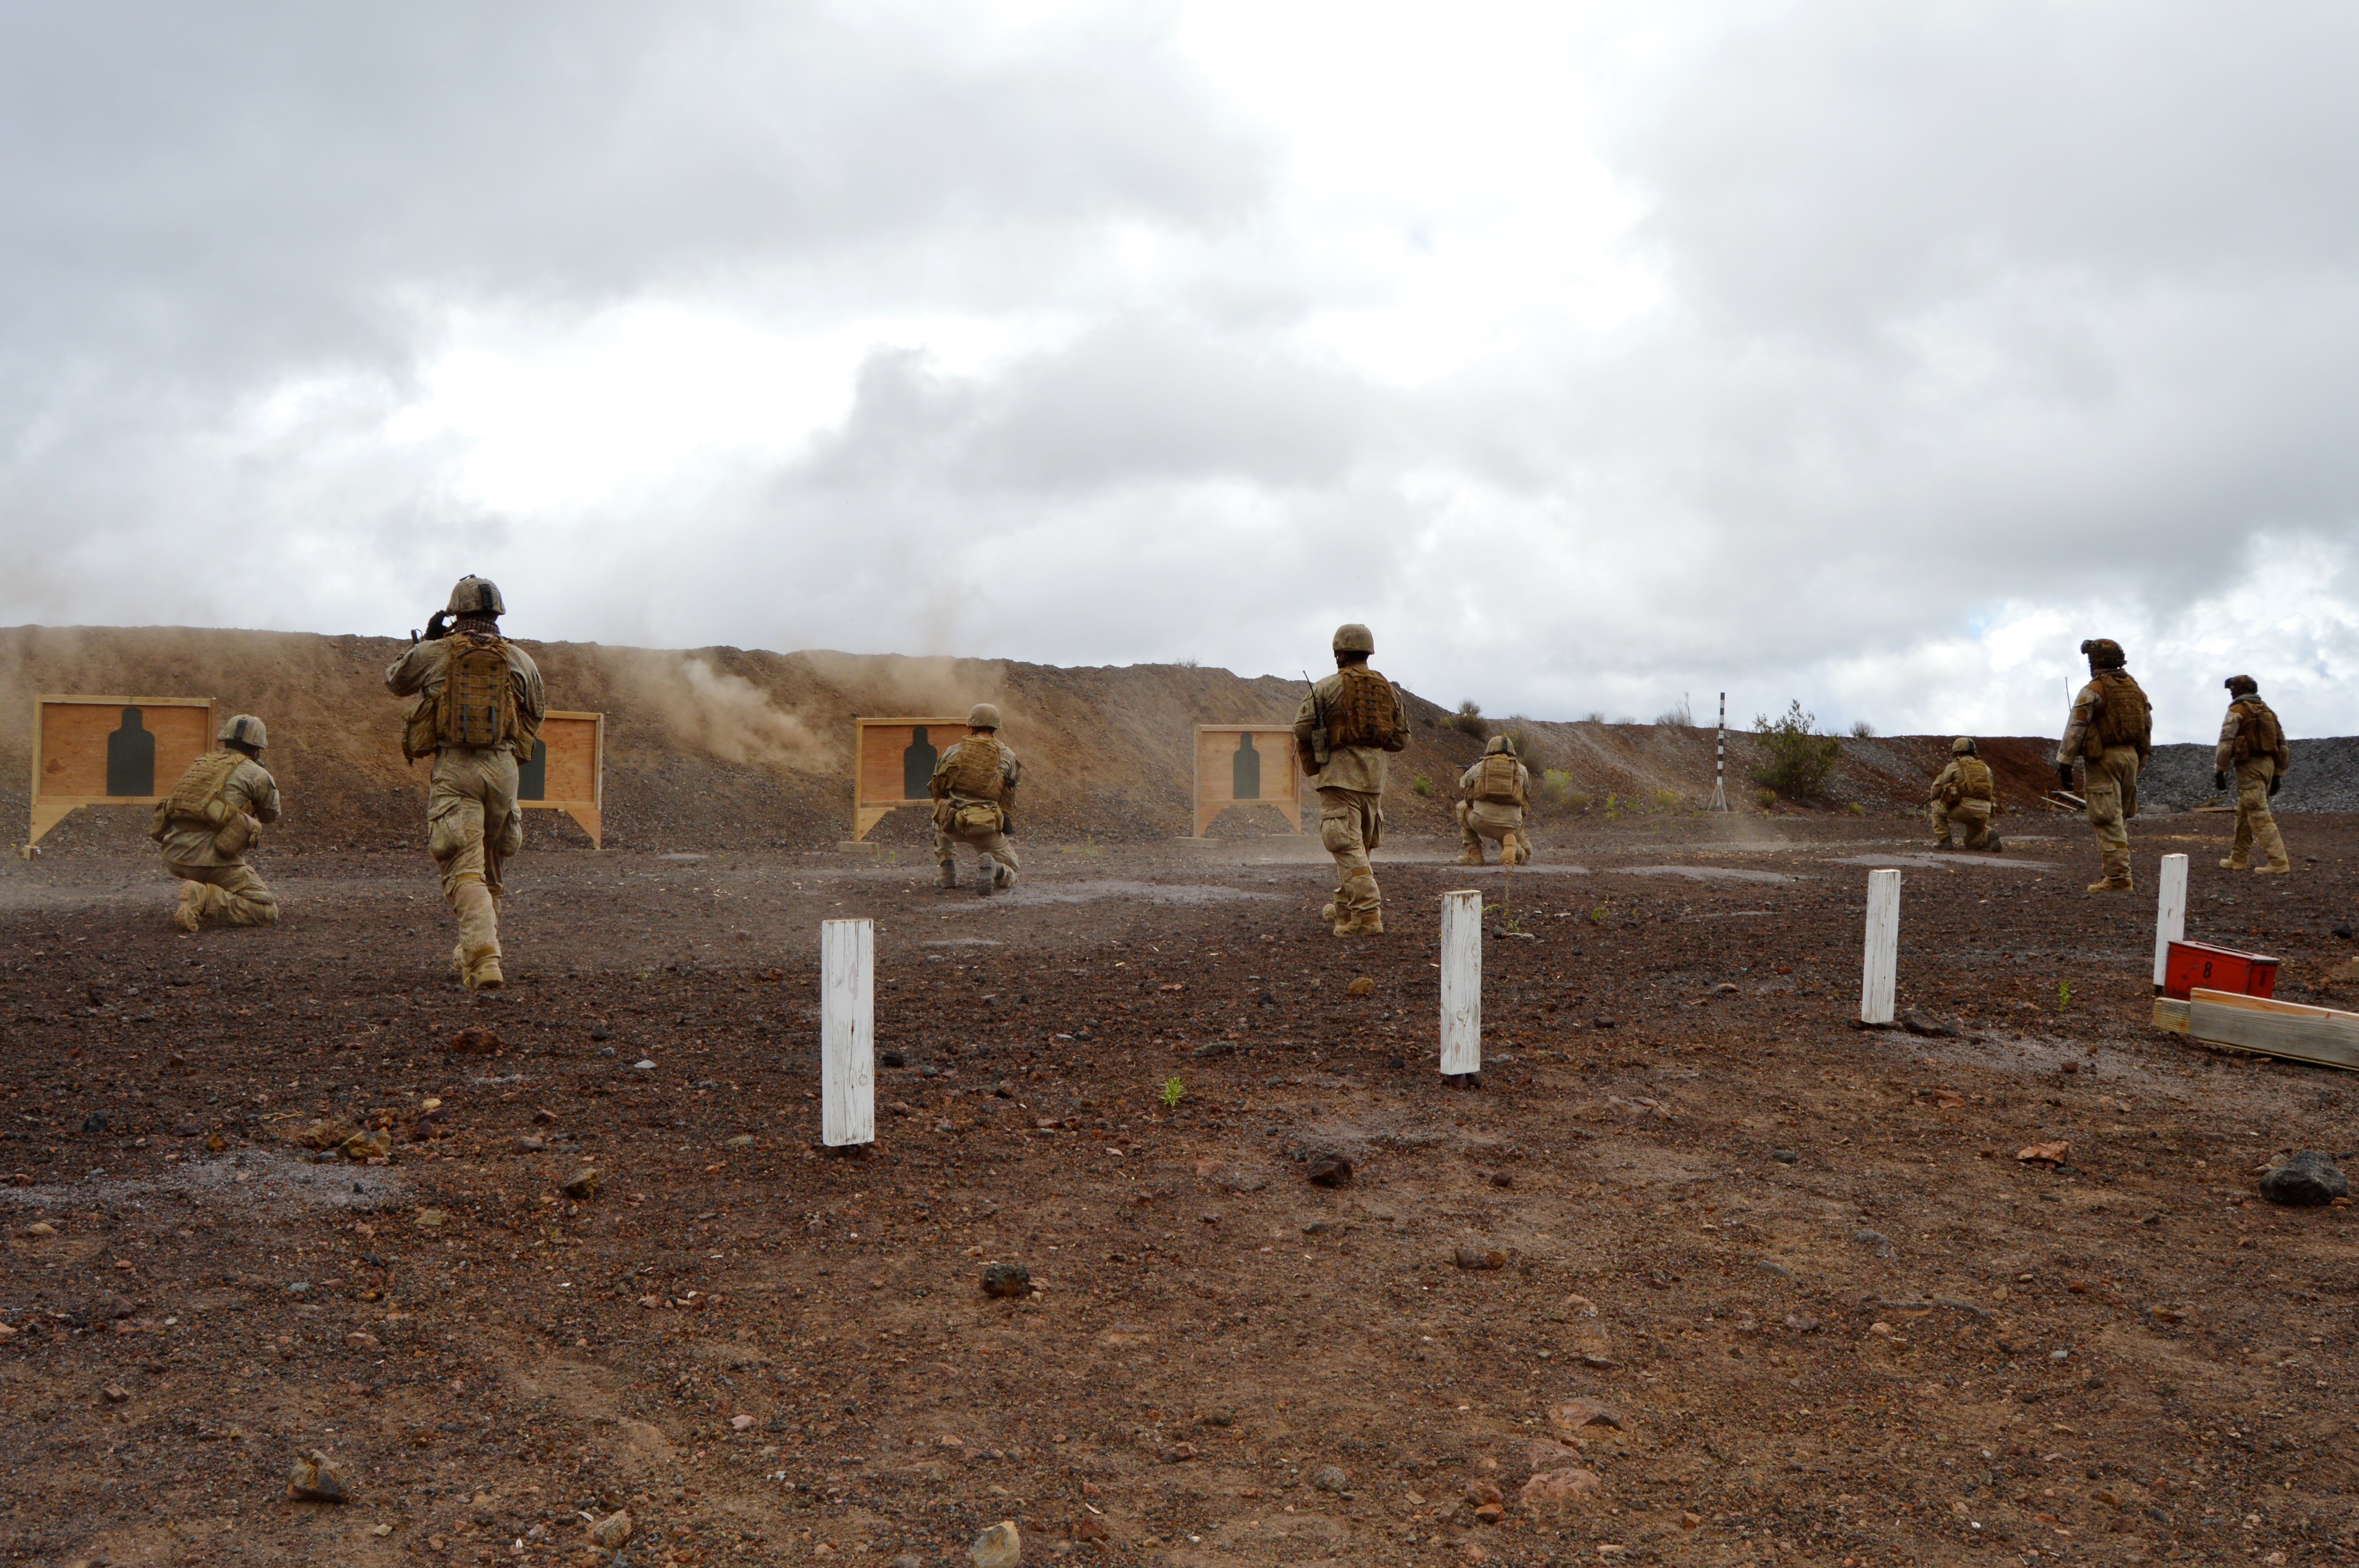 Soldiers from the Royal New Zealand Army practice individual small arms skills at the Pohakuloa Training Area Range 8 on July 17, 2016 during the Rim of the Pacific exercise. USNI News photo.